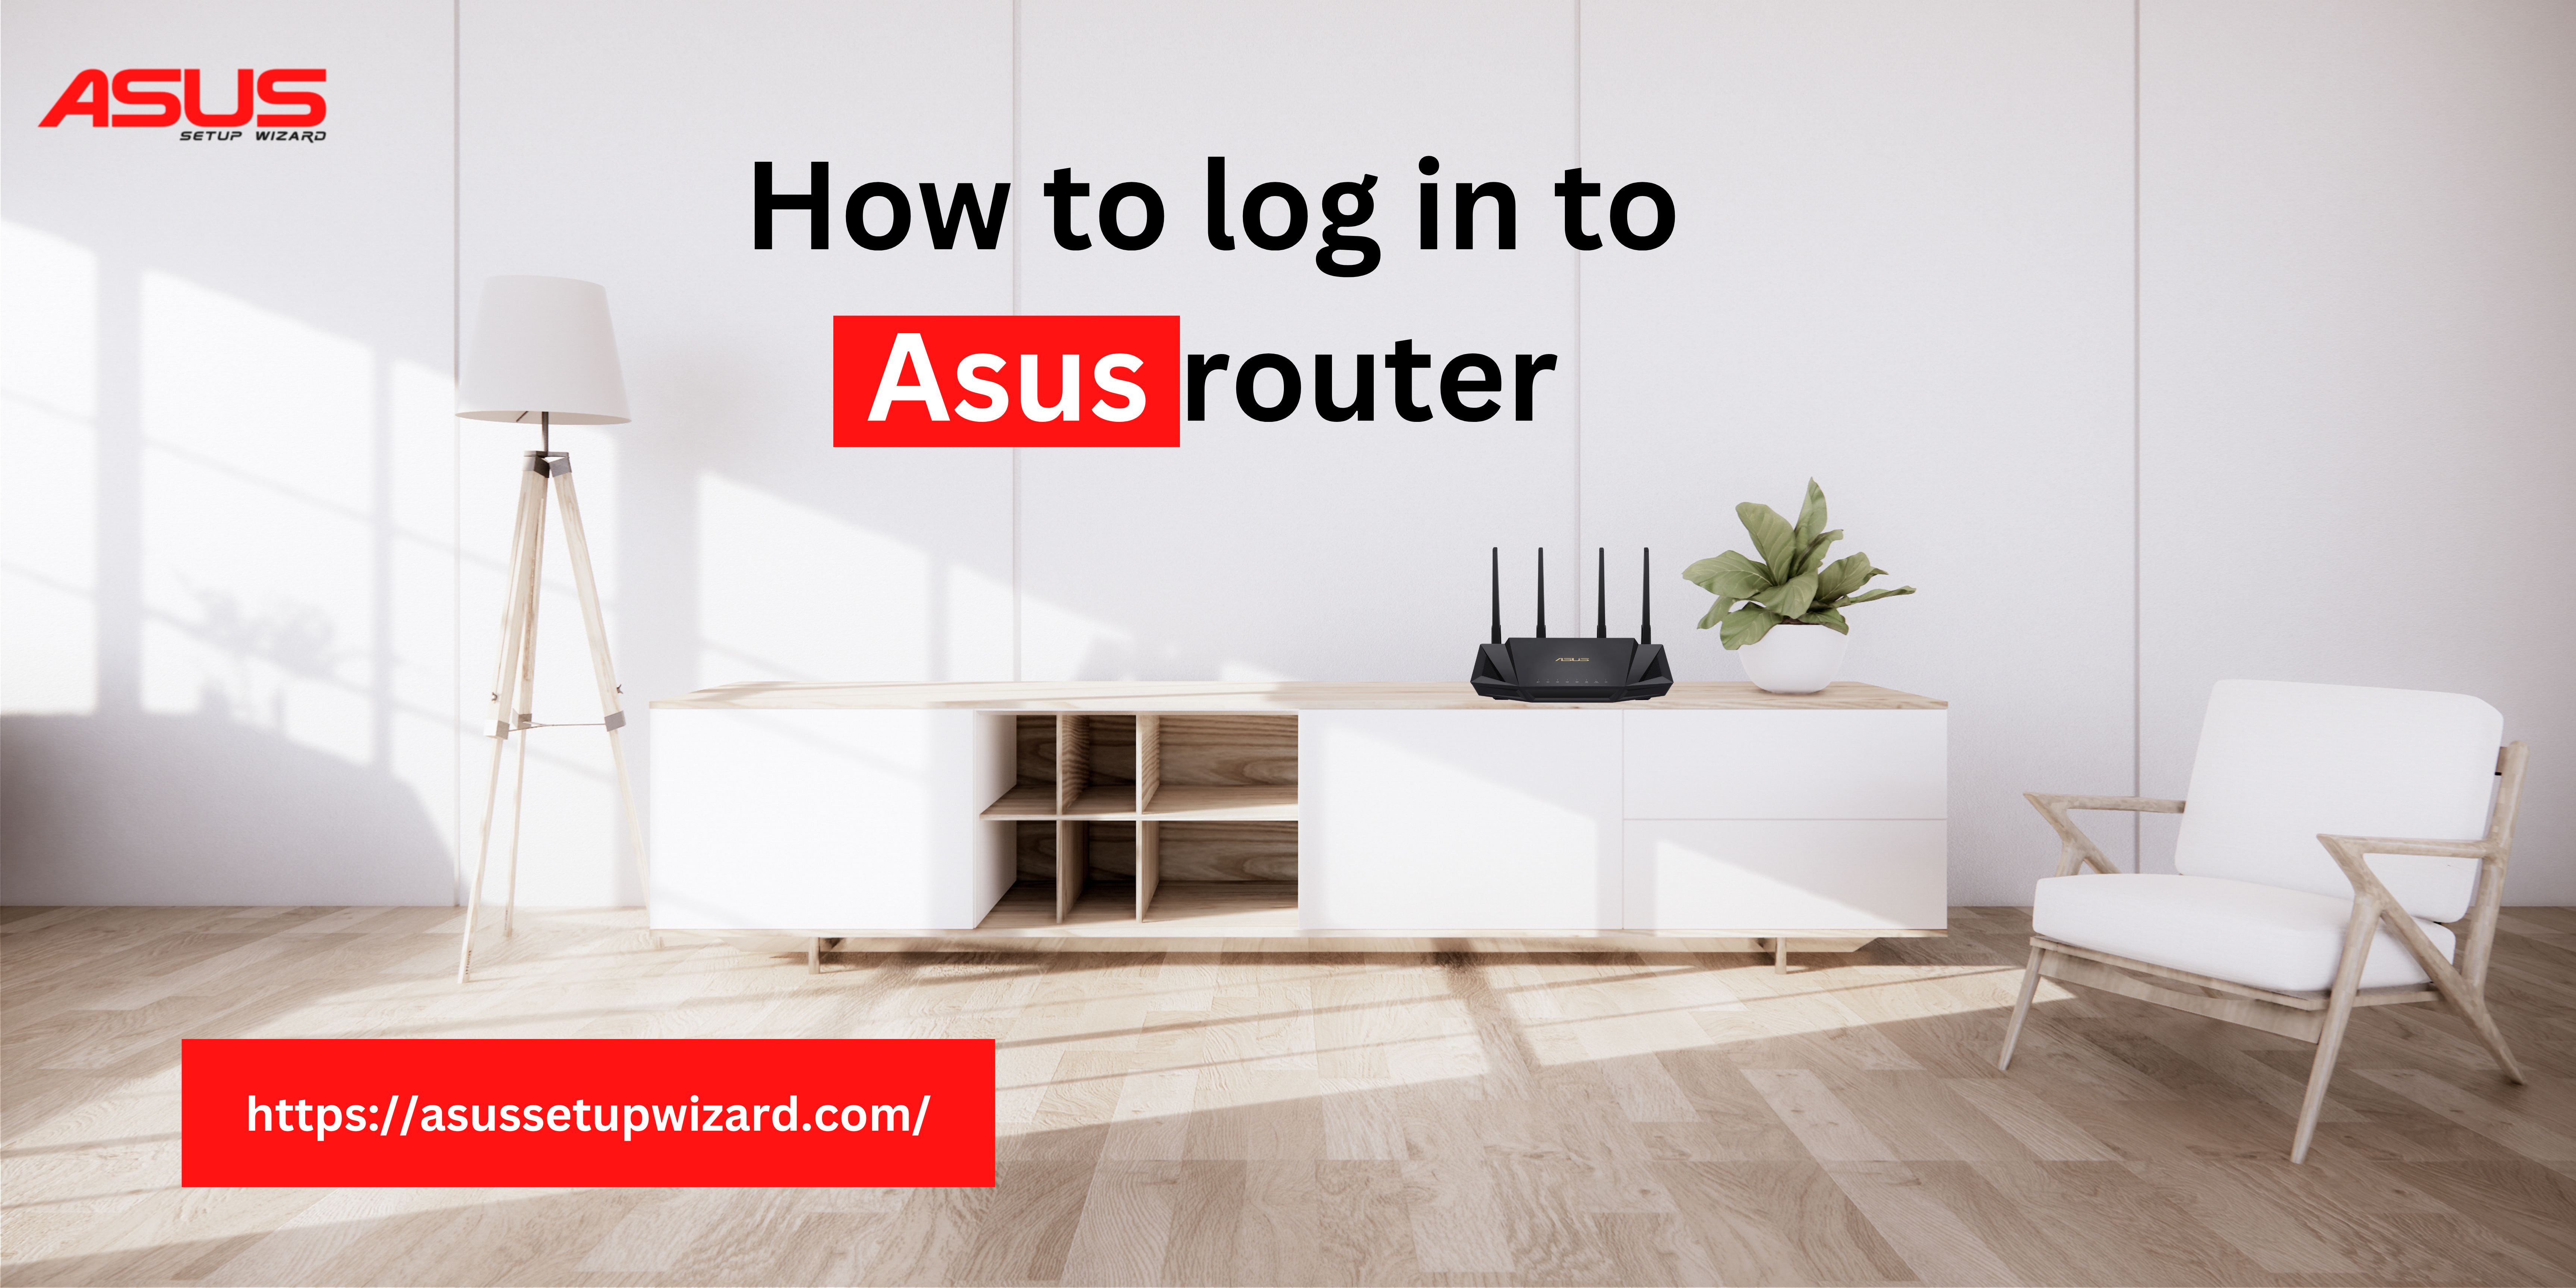 How to Login Asus Router? Read This Guide! – George Barton